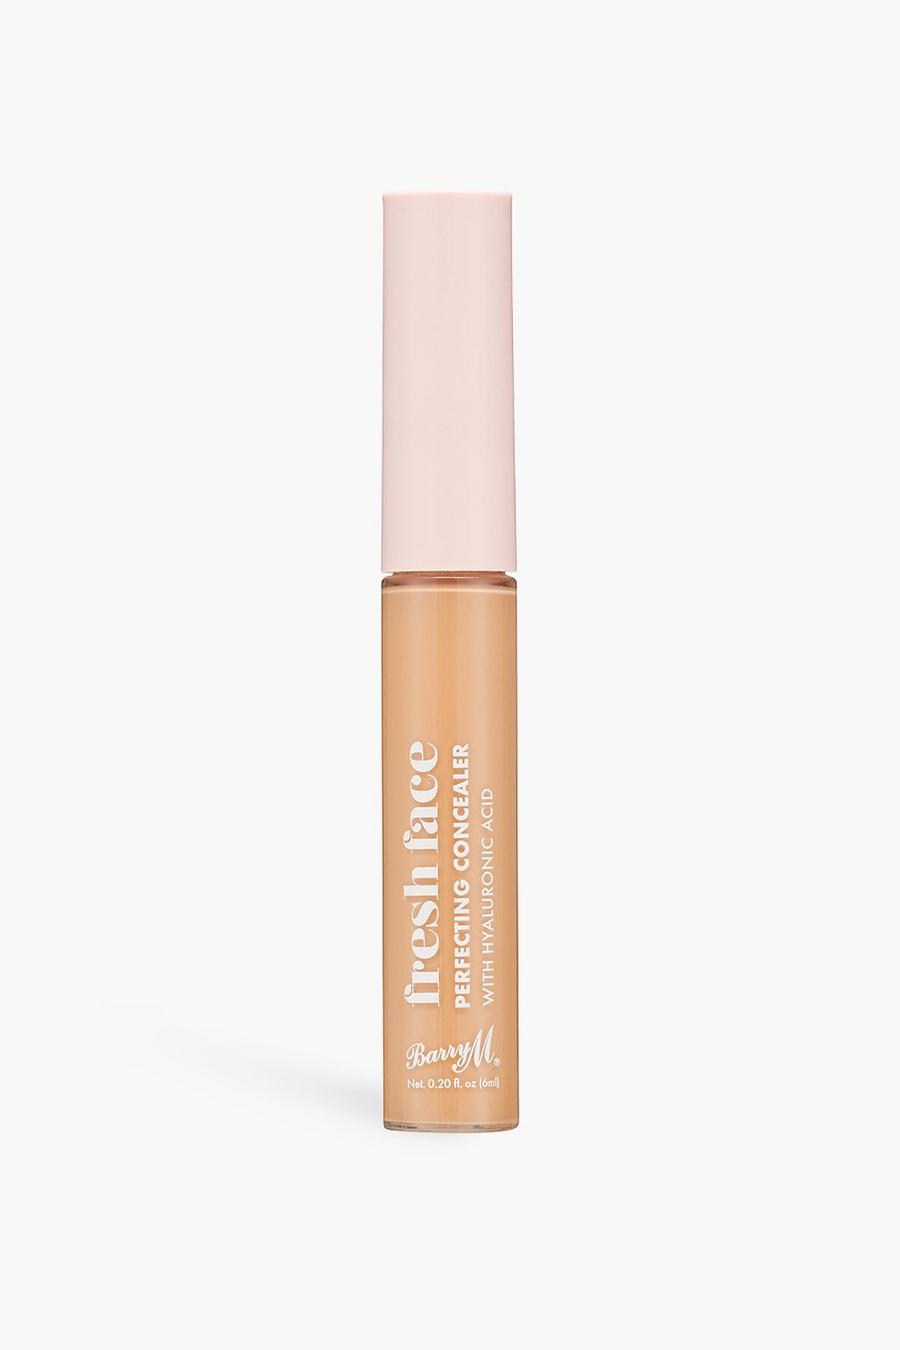 Barry M Fresh Face Perfecting Concealer 7, Tan marron